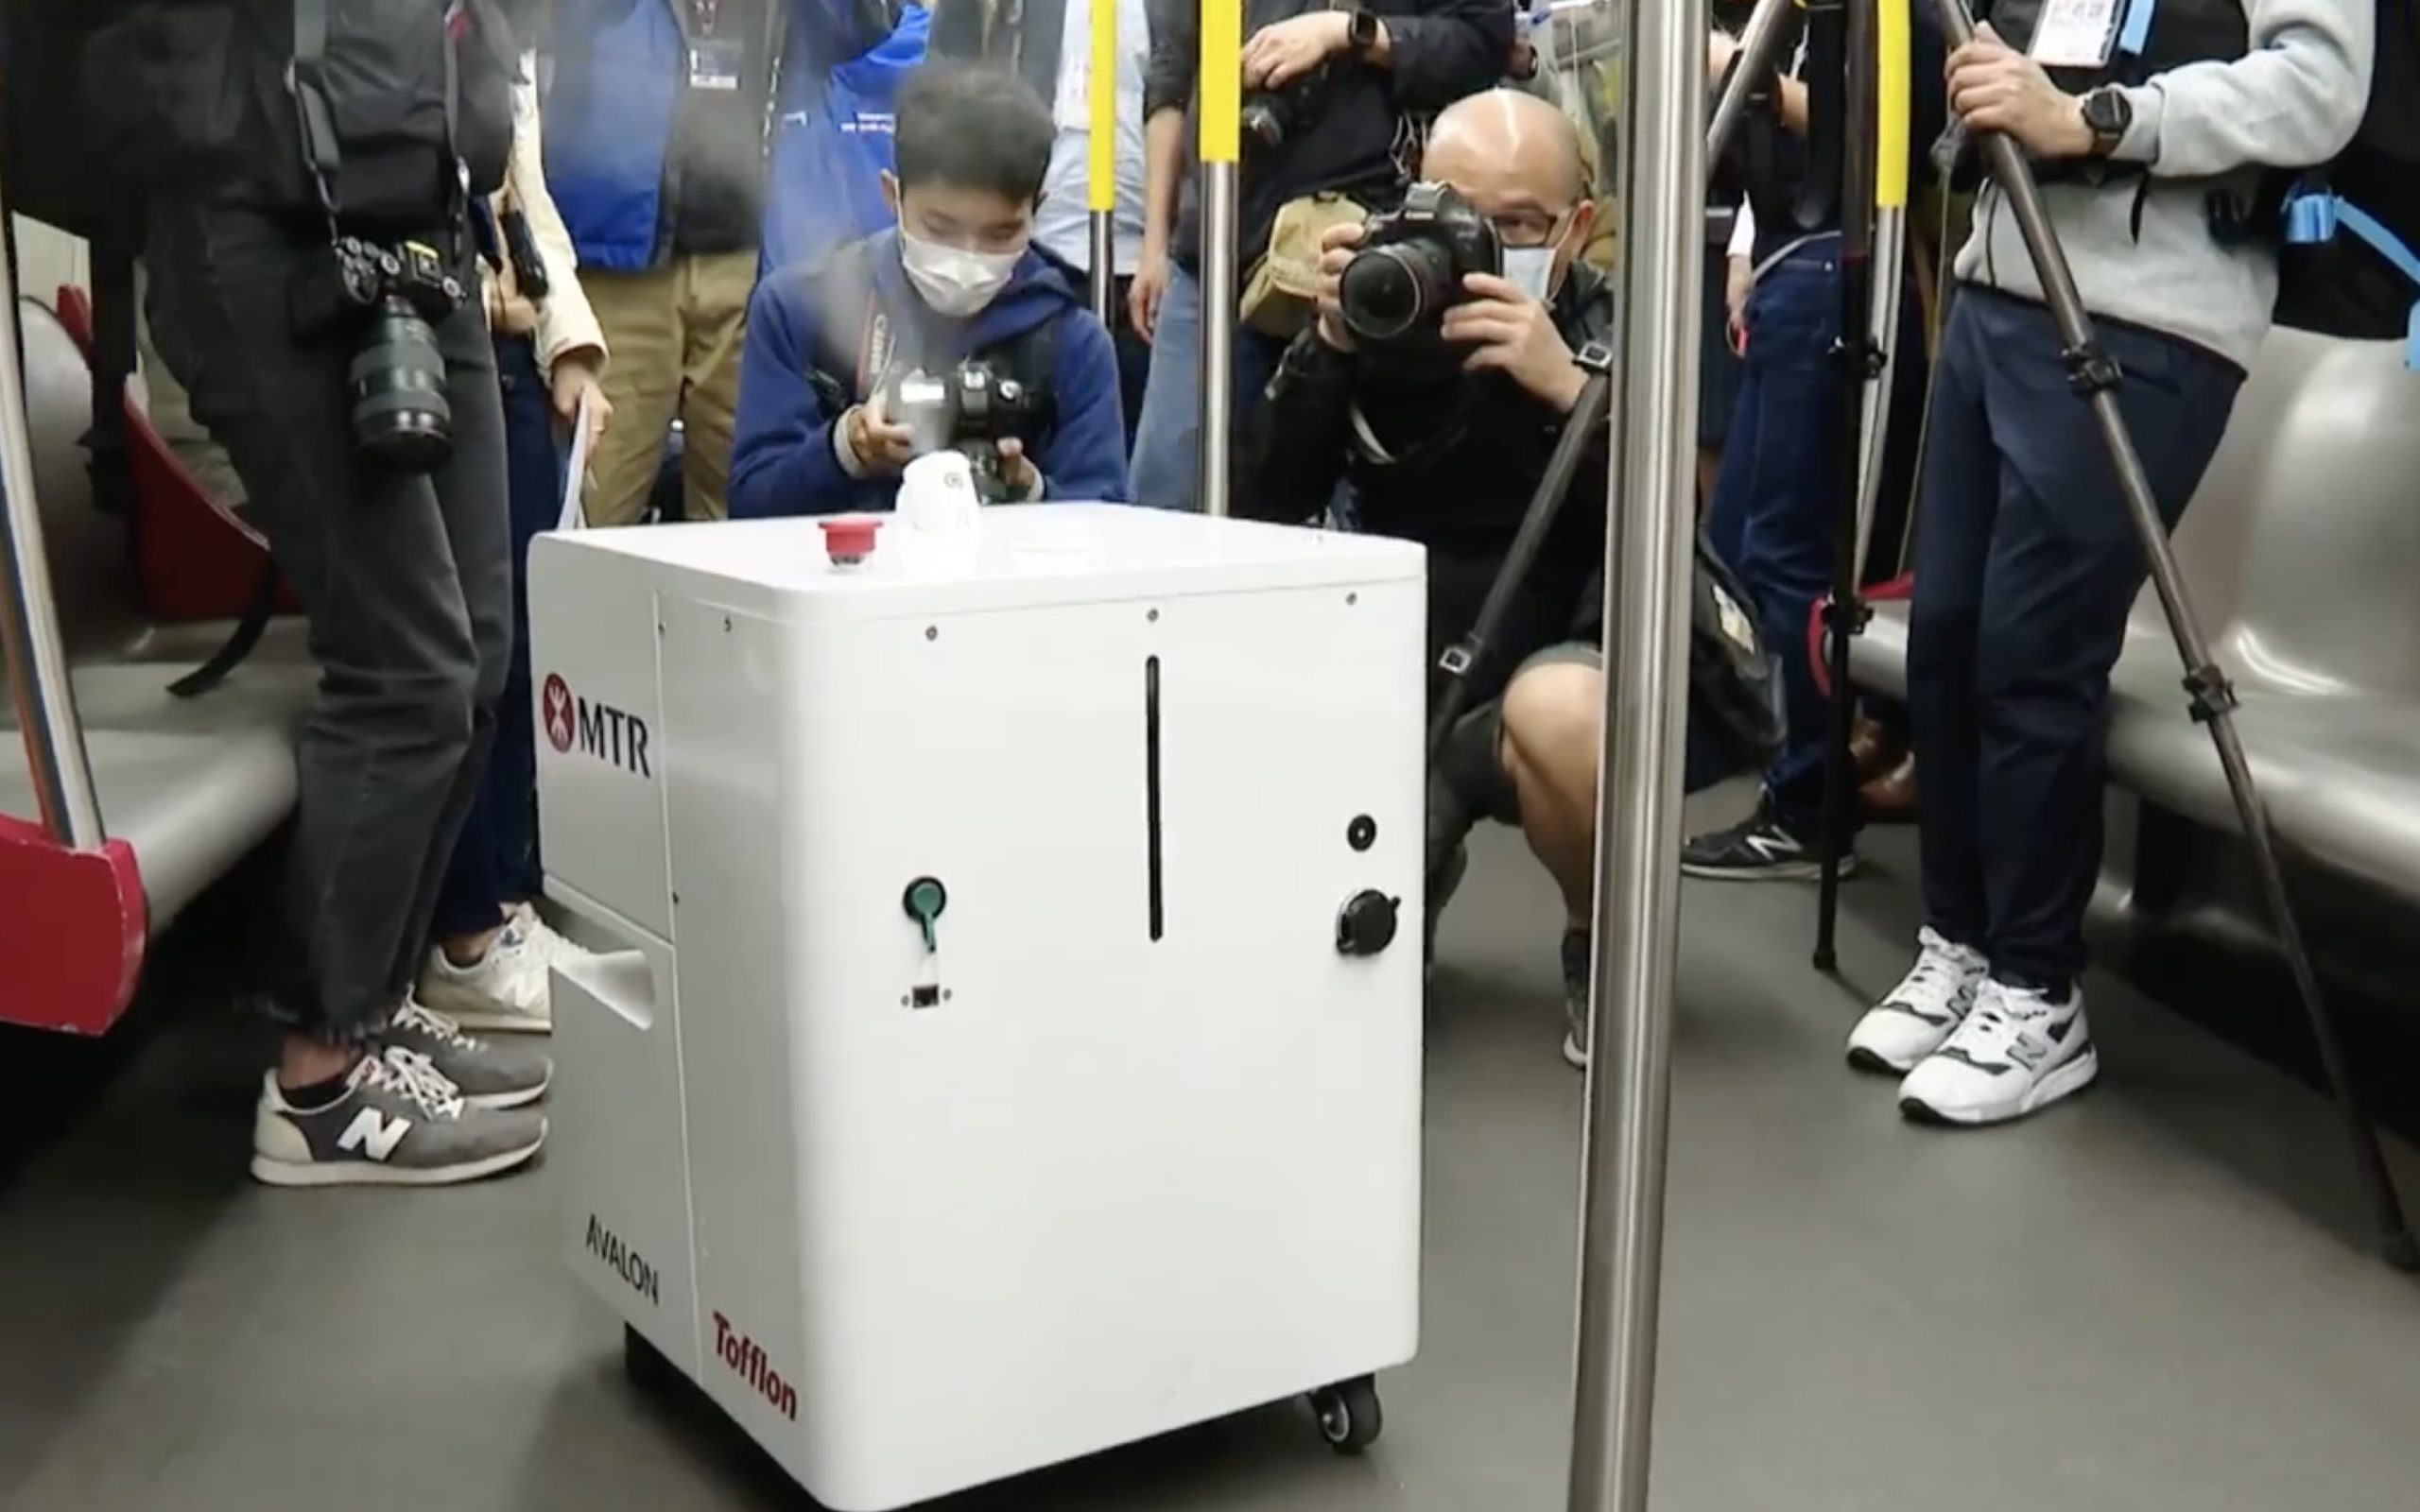 The MTR have spent HK$20 million on an army of robots that will disinfect trains in the fight against the coronavirus. Screengrab via Facebook video/RTHK.